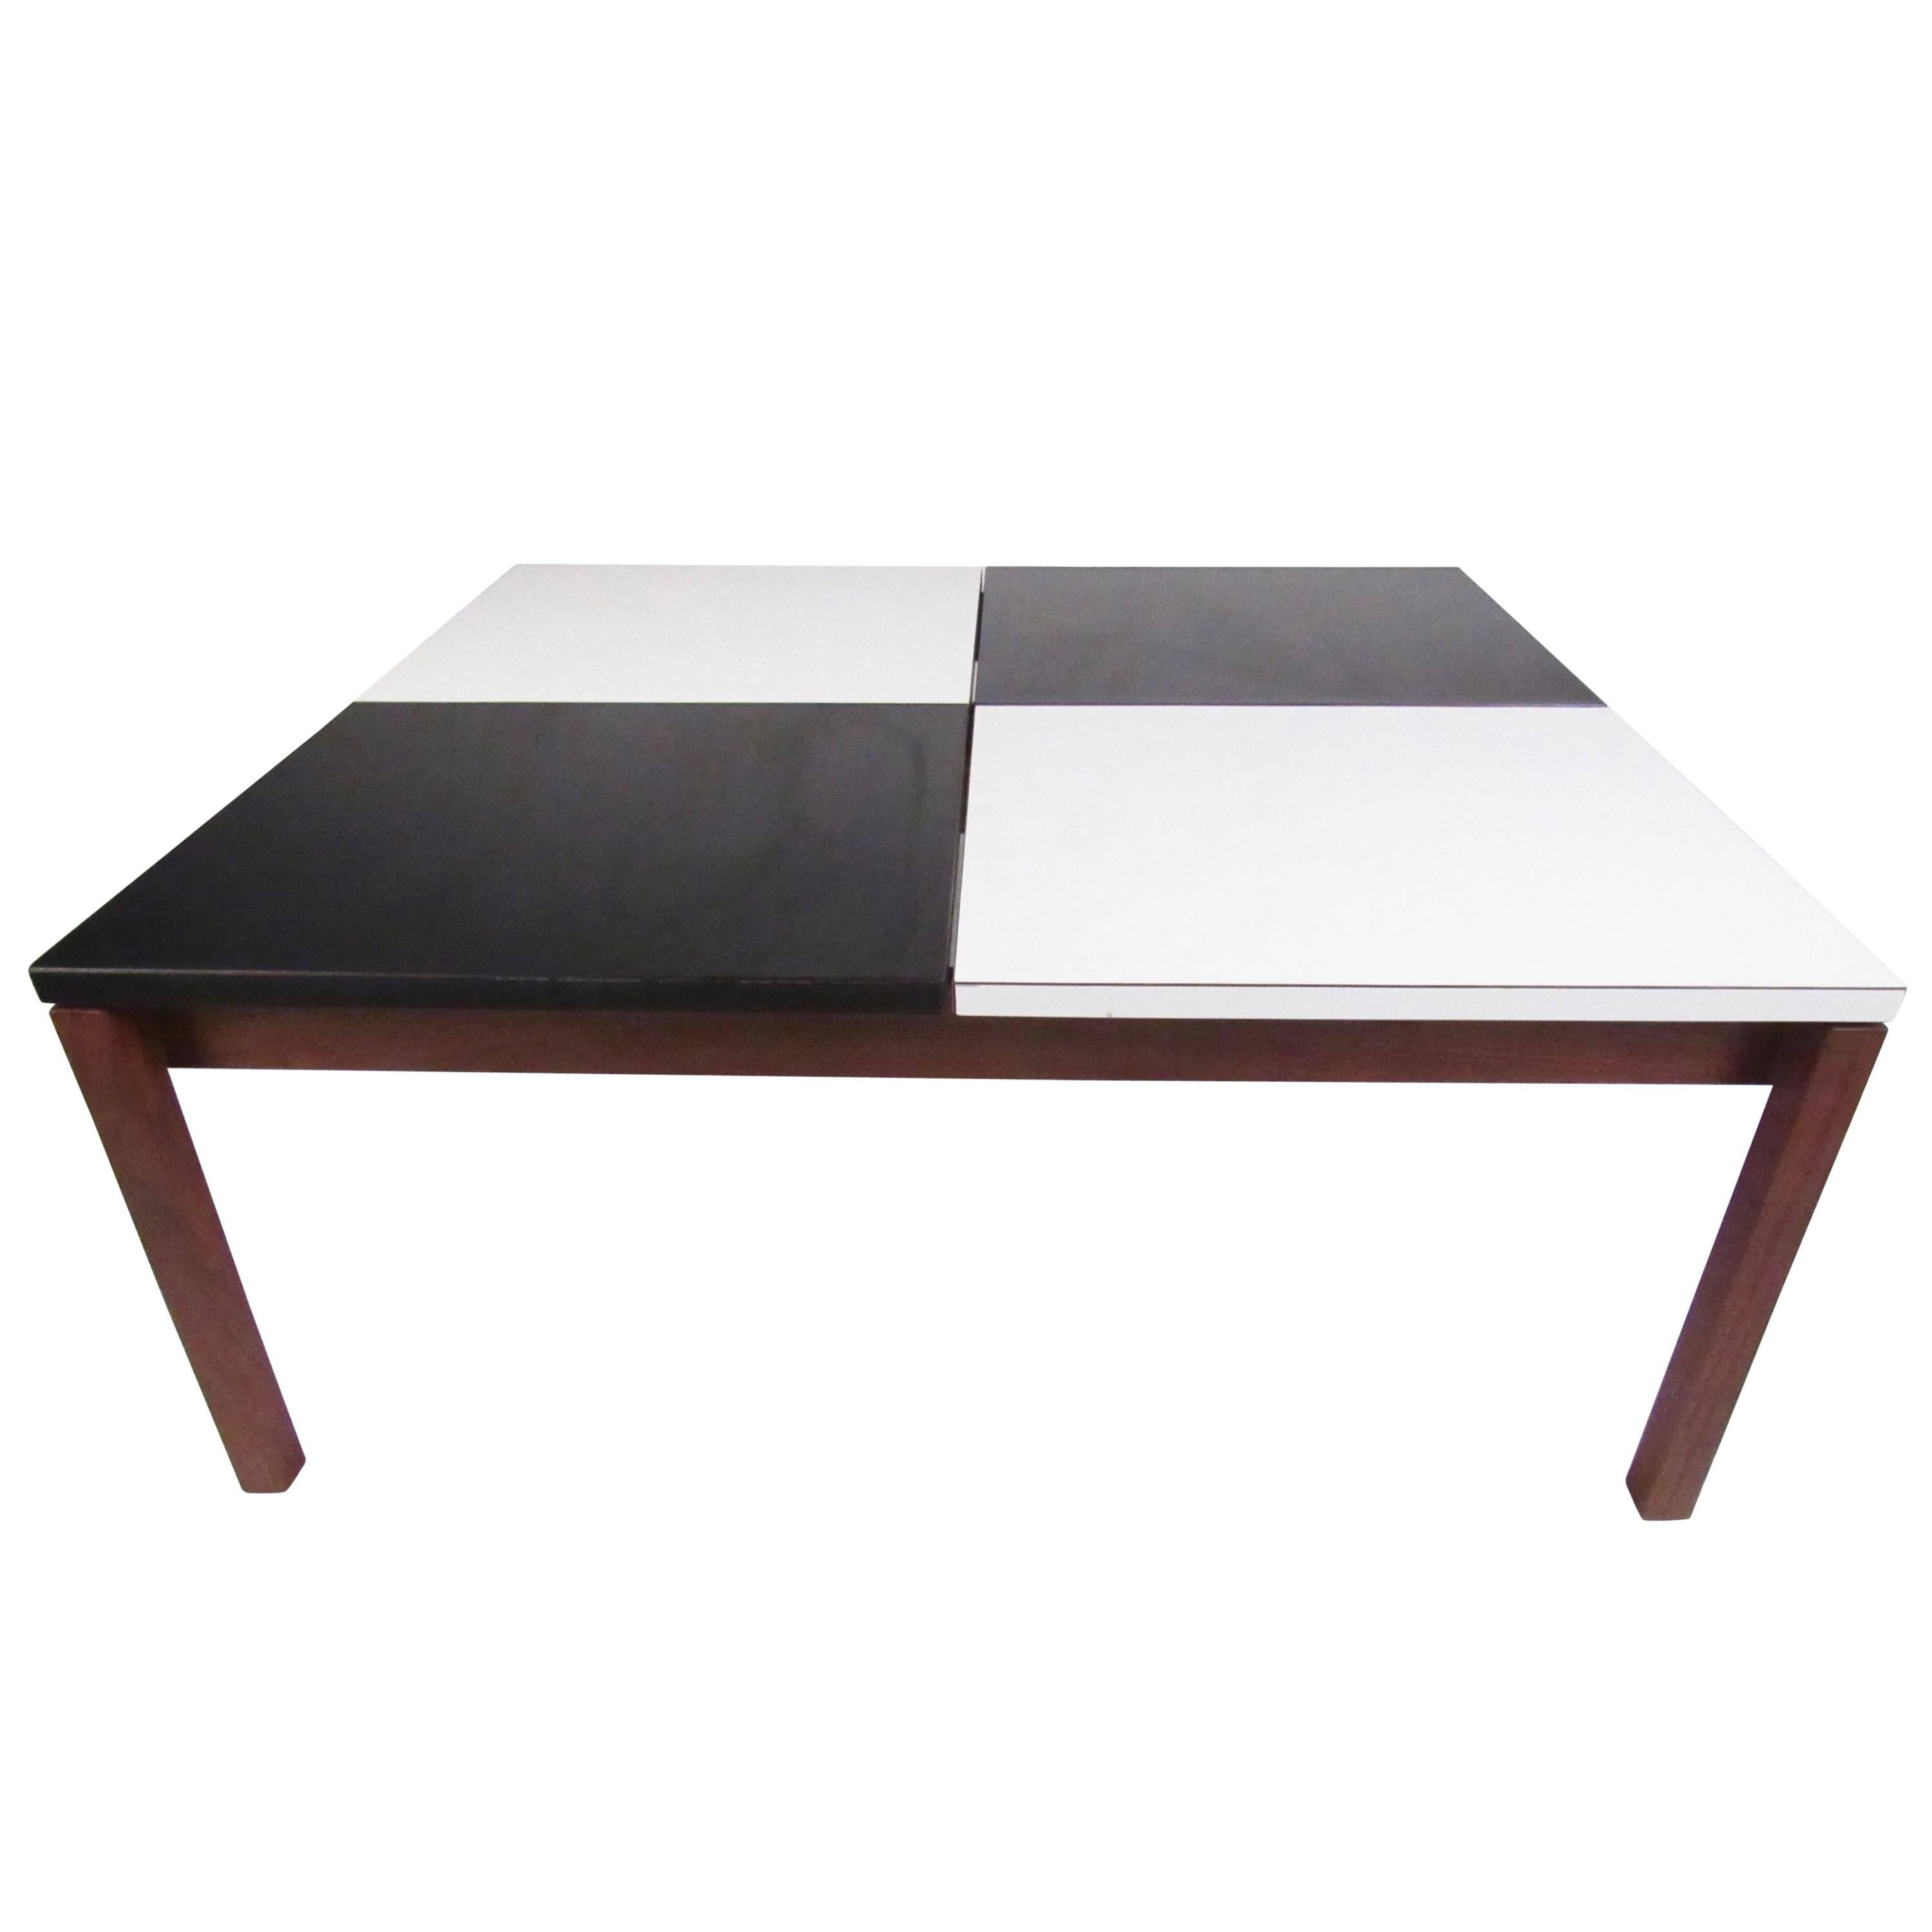 Vintage Modern Black and White Coffee Table by Lewis Butler for Knoll Associates For Sale